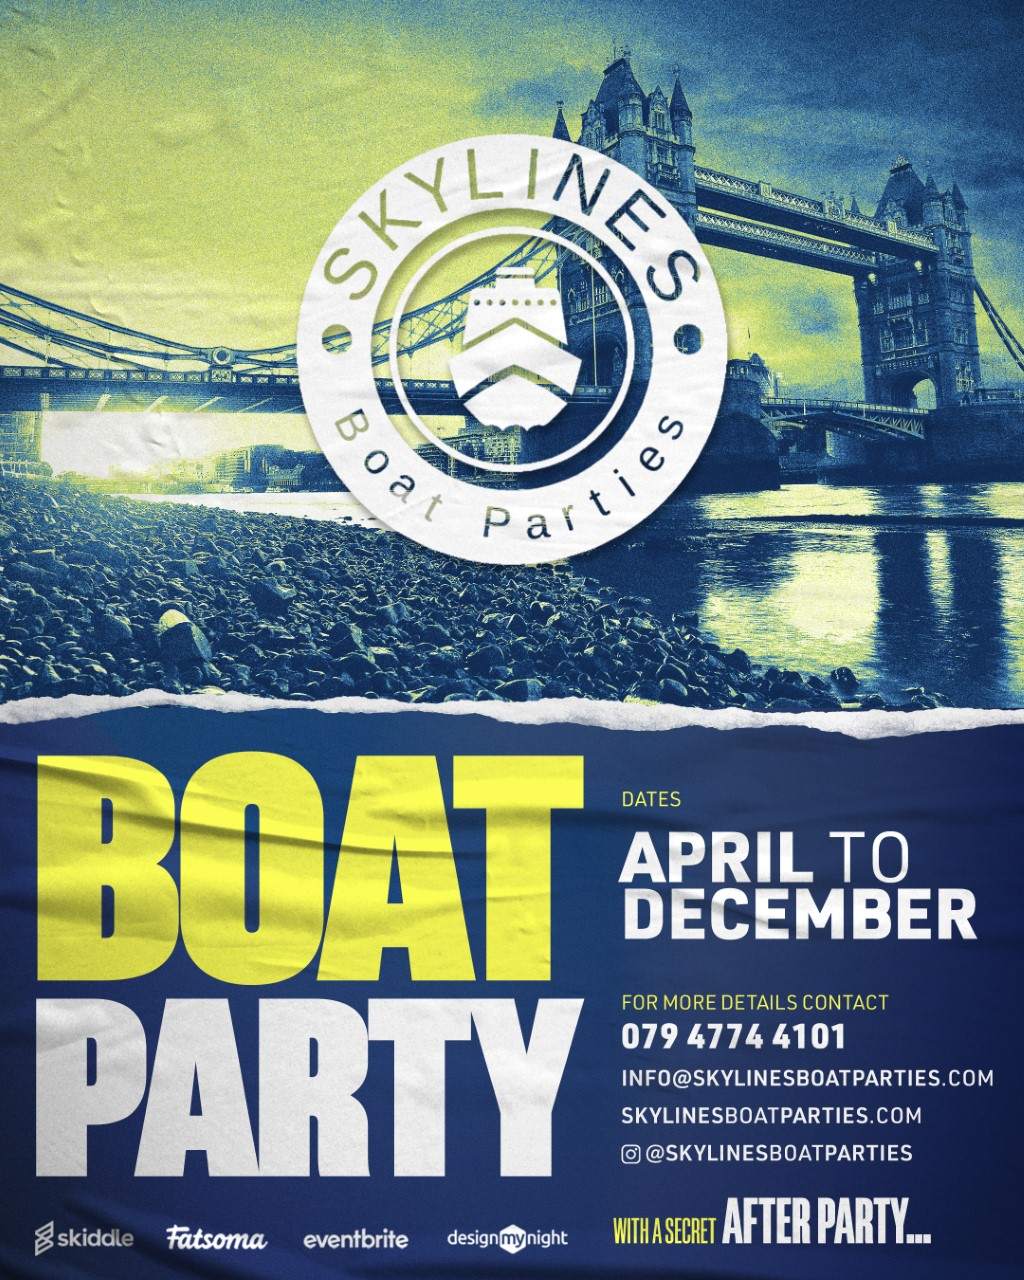 BOAT CELEBRATIONS ON THE THAMES WITH A SECRET AFTER PARTY AT EGG LONDON - フライヤー裏